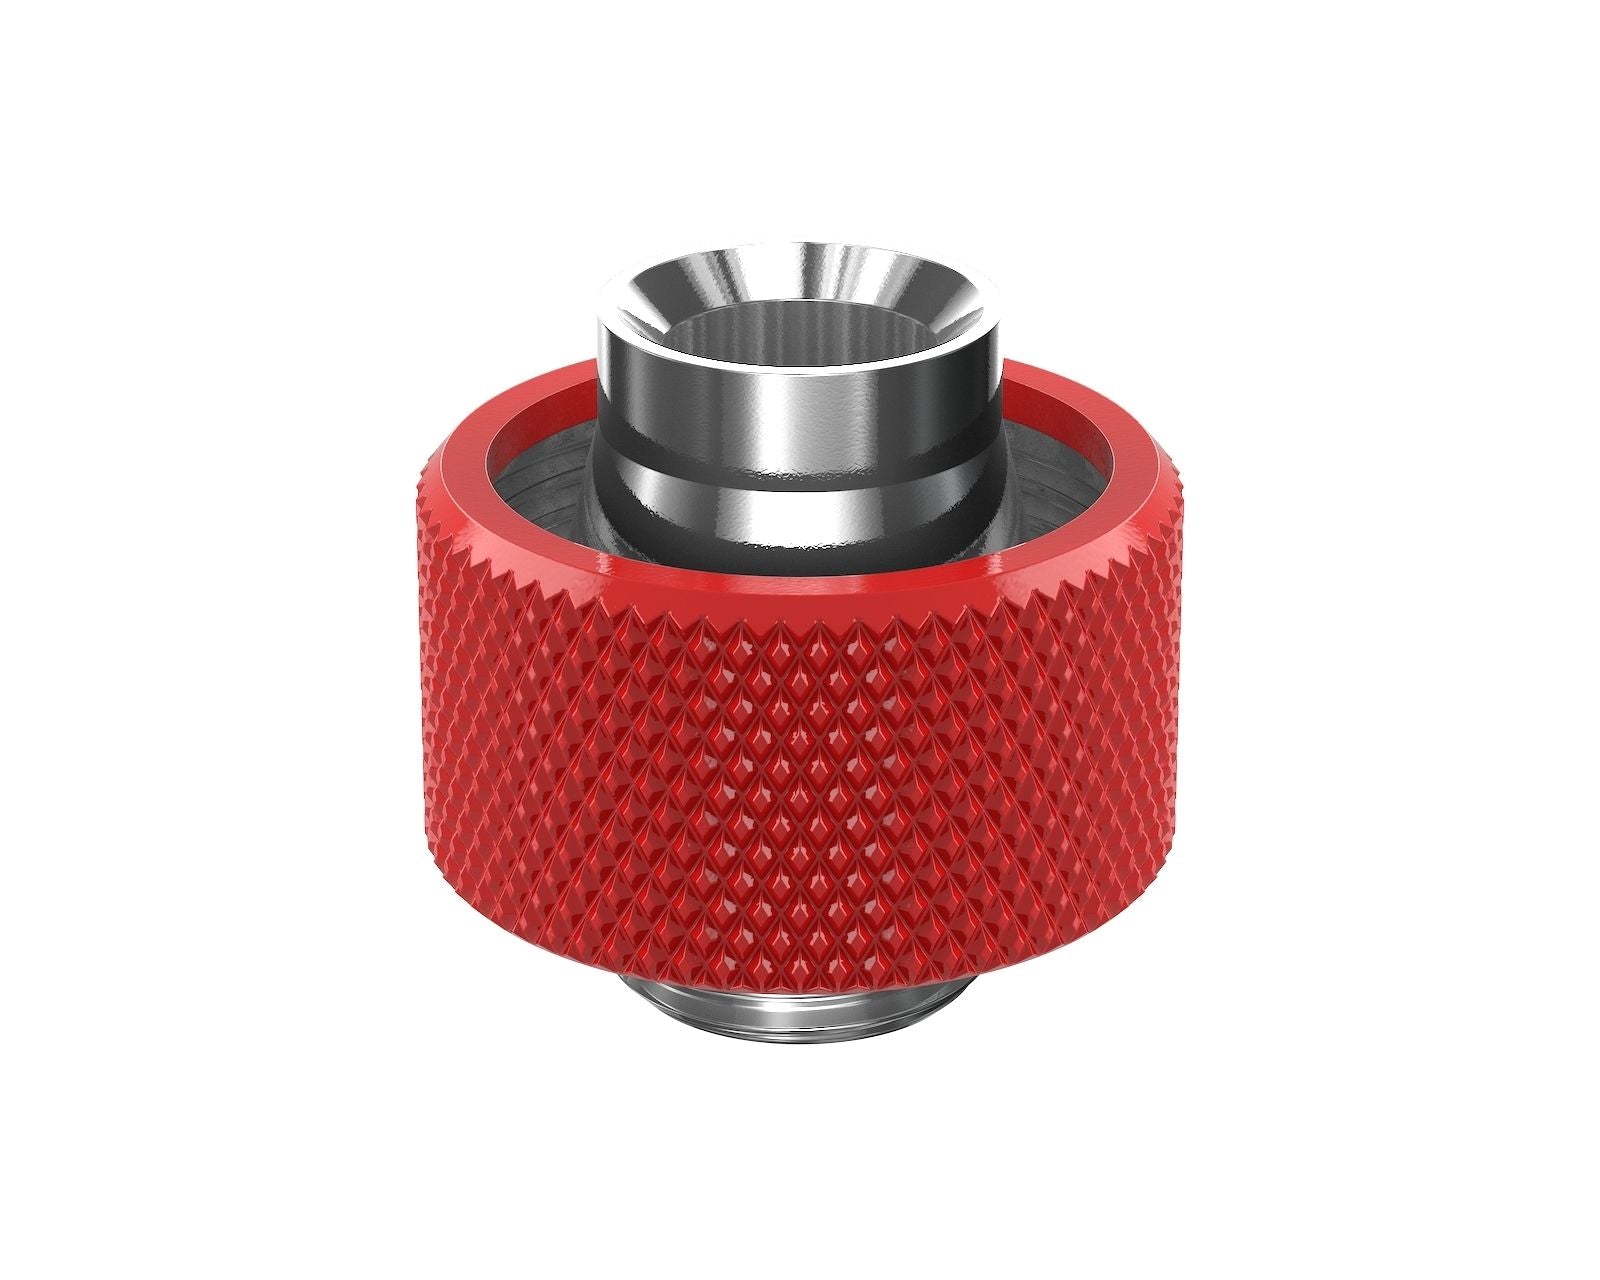 PrimoChill SecureFit SX - Premium Compression Fitting For 1/2in ID x 3/4in OD Flexible Tubing (F-SFSX34) - Available in 20+ Colors, Custom Watercooling Loop Ready - Razor Red